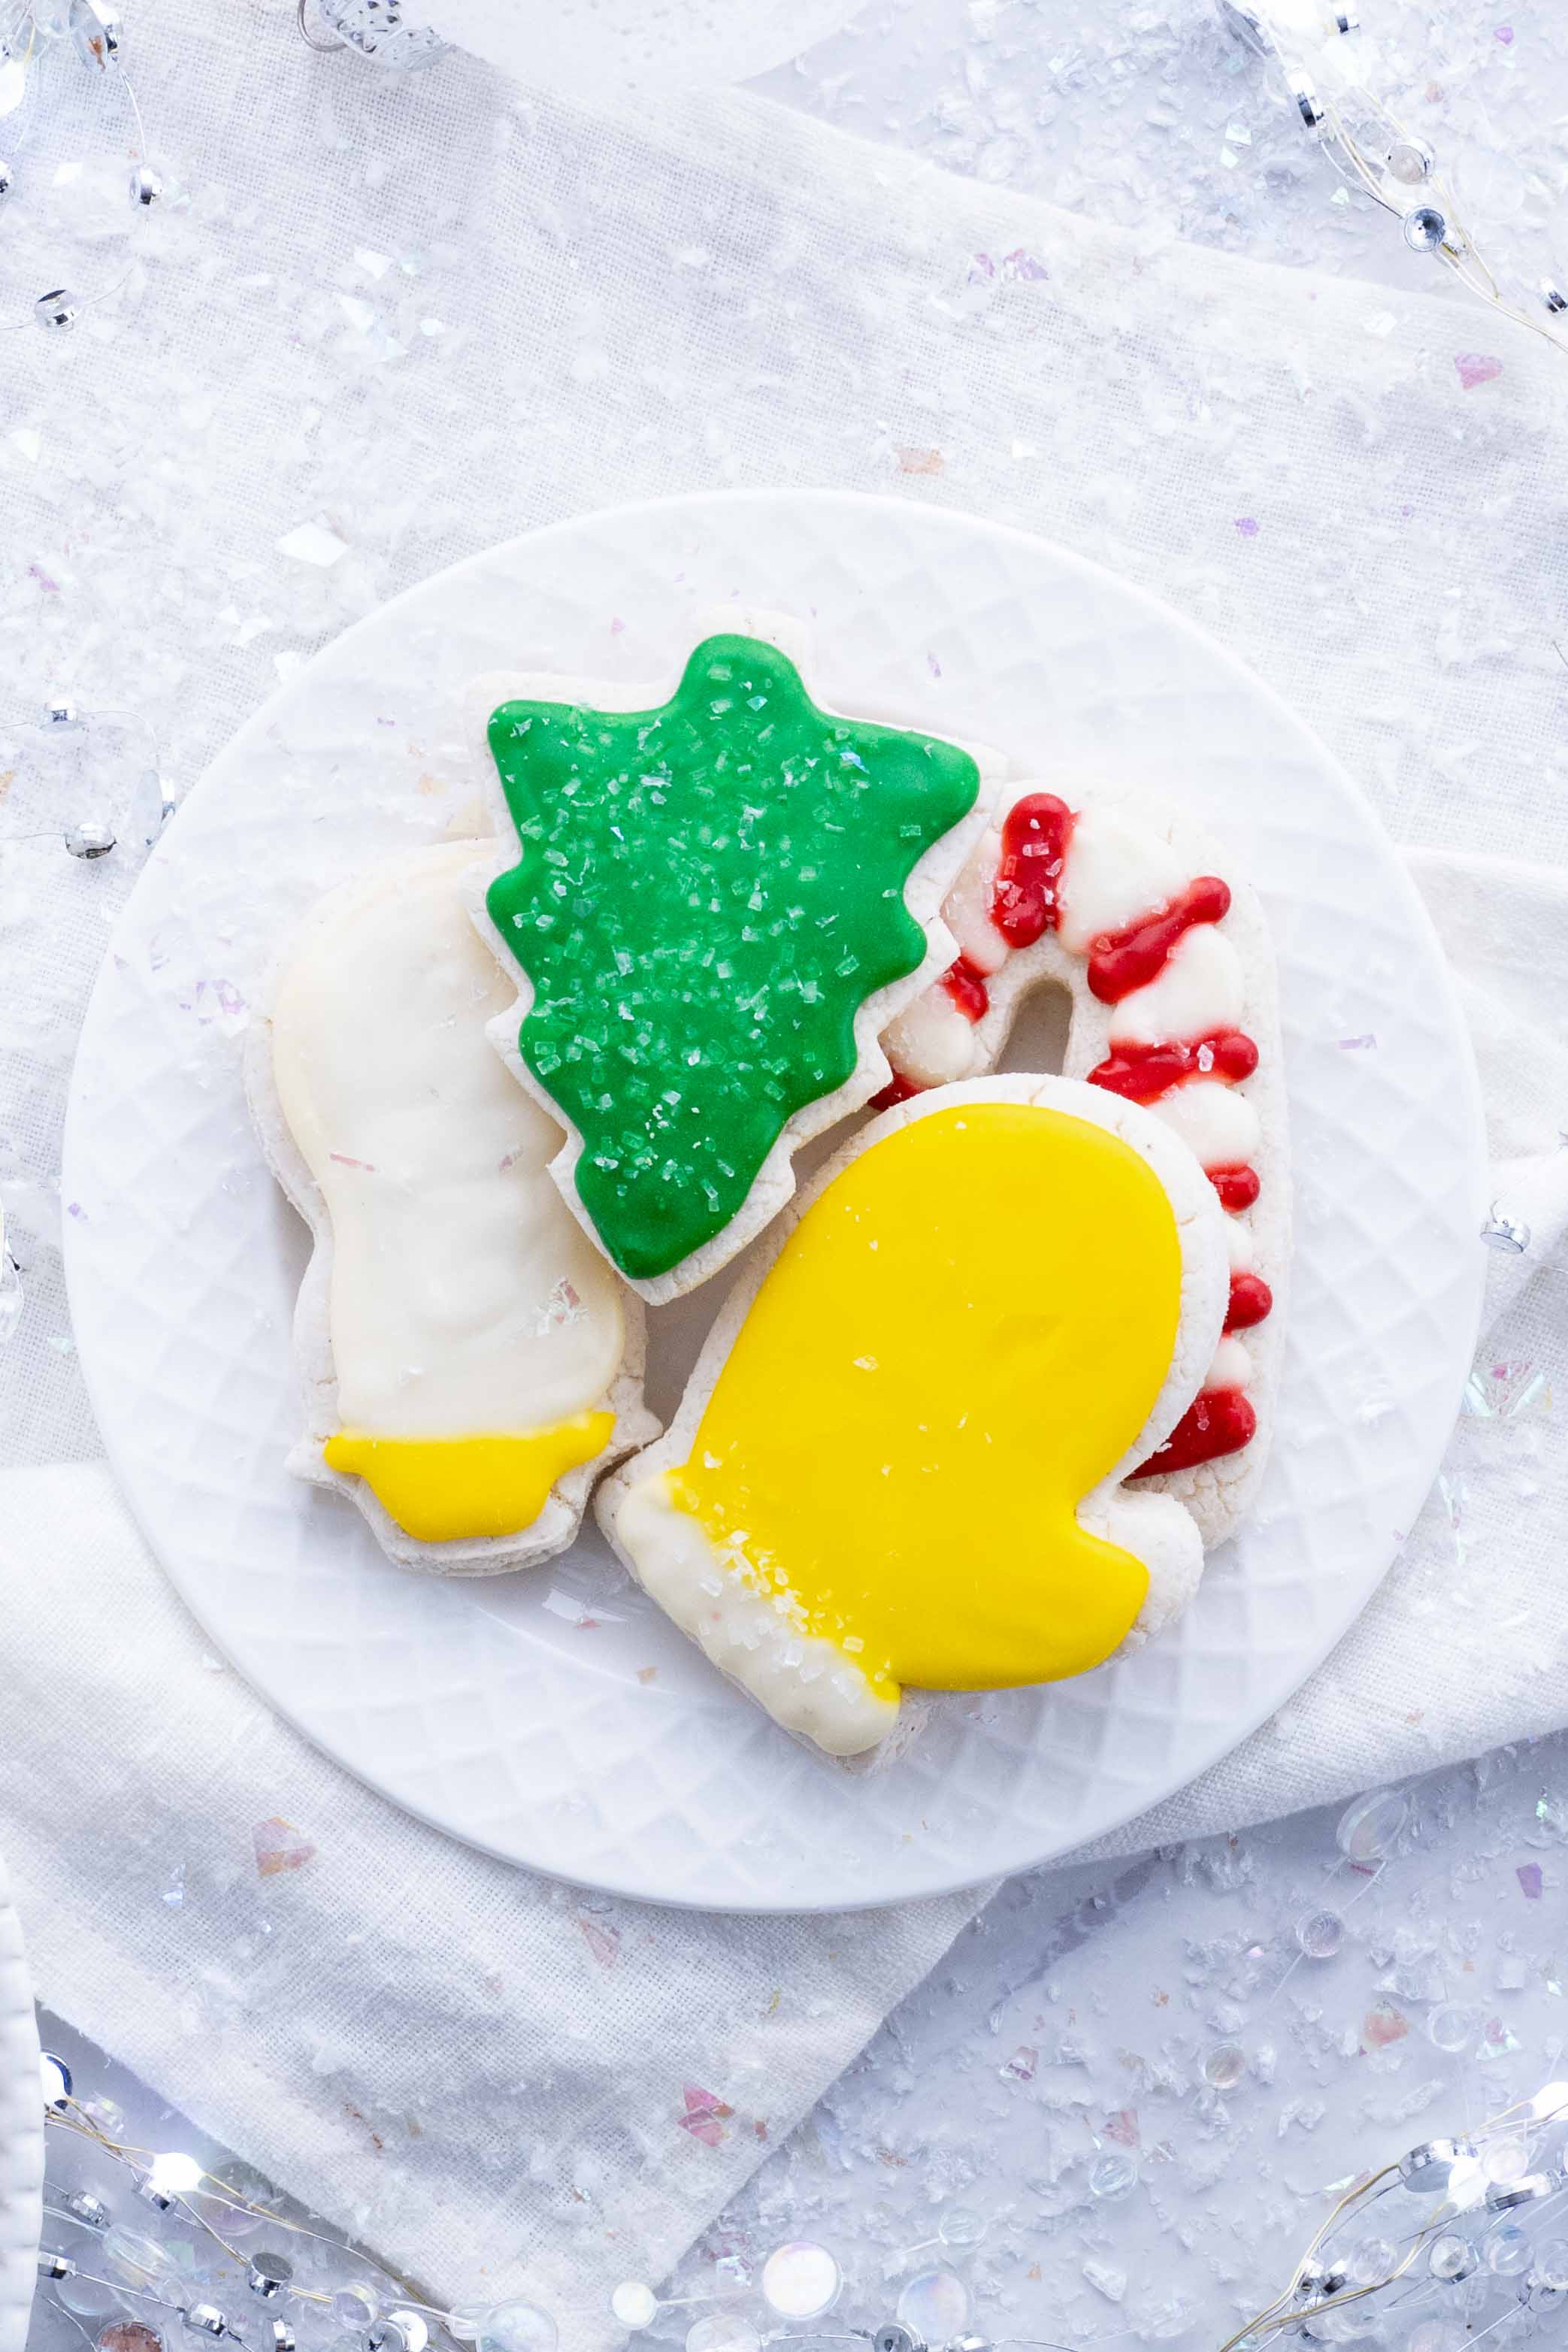 Sugar cookies are decorated with icing and sprinkles.